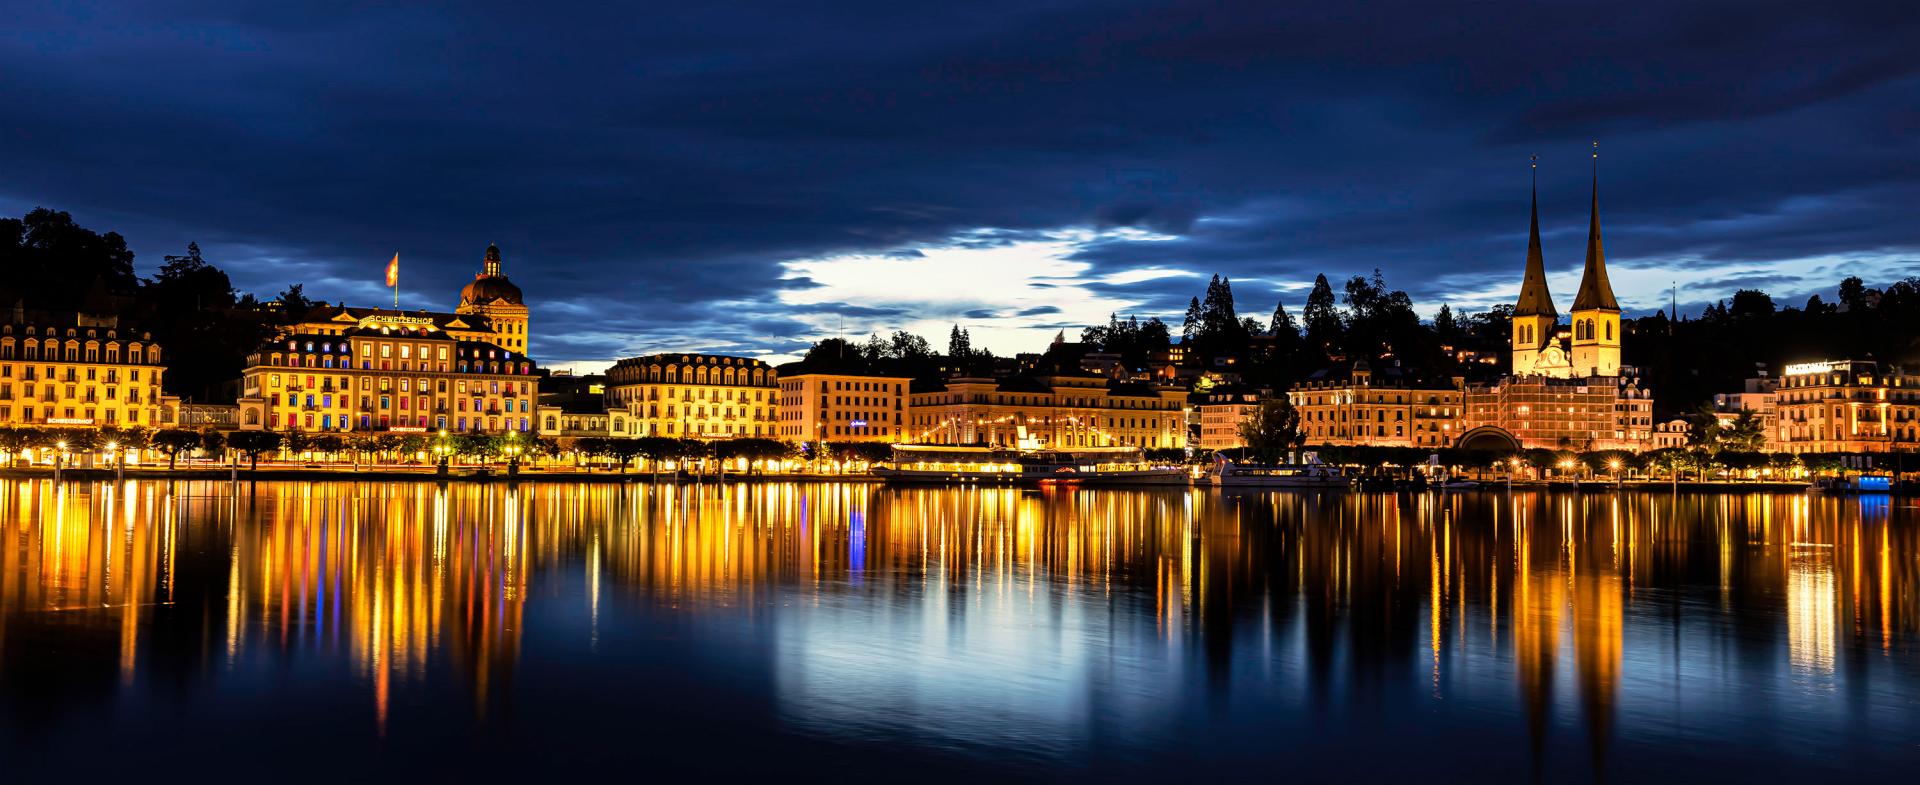 London Photography Awards Winner - LUCERNE in the blue hour